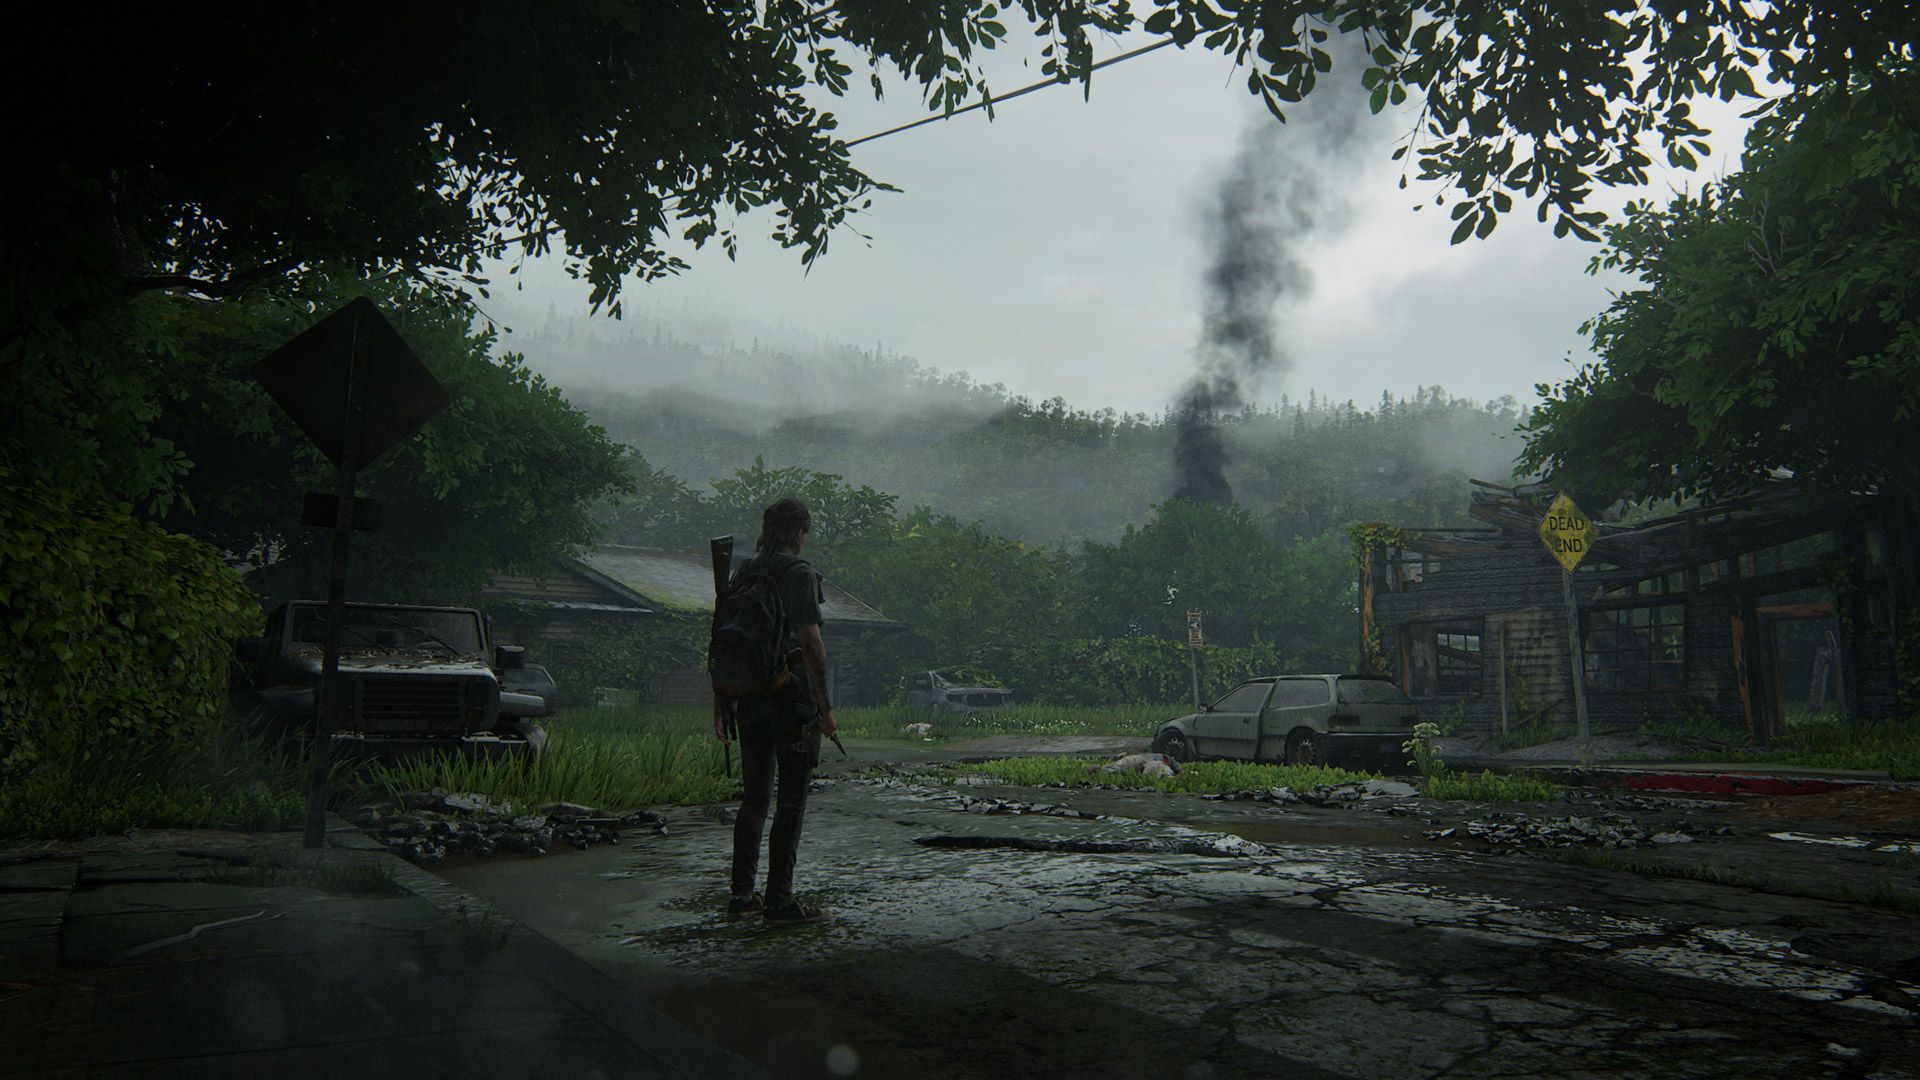 The Last of Us [2] wallpaper - Game wallpapers - #14863